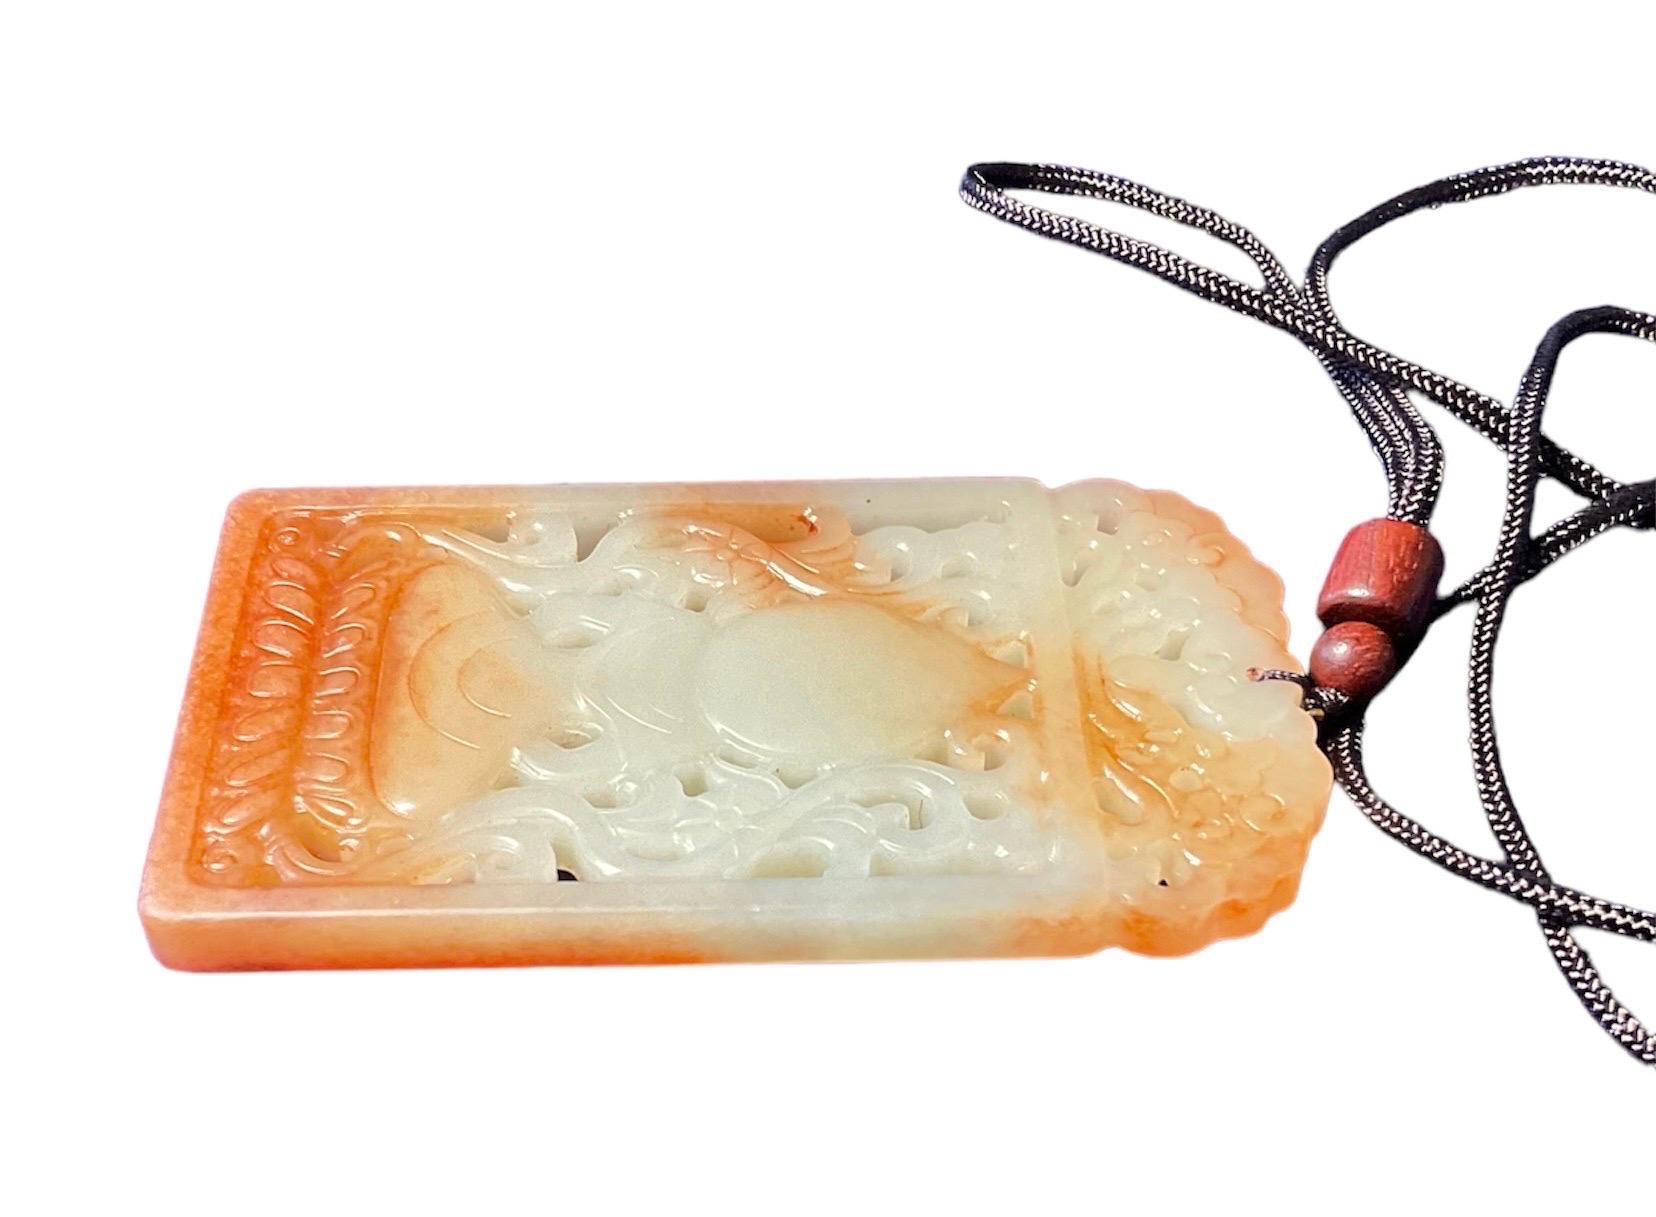 This a Buddha Jade Pierced Pendant. It is a rectangular hand carved white and orange jade depicting a seated Buddha and adorned with scrolls and flowers. The pendant is tied to a braided thread.